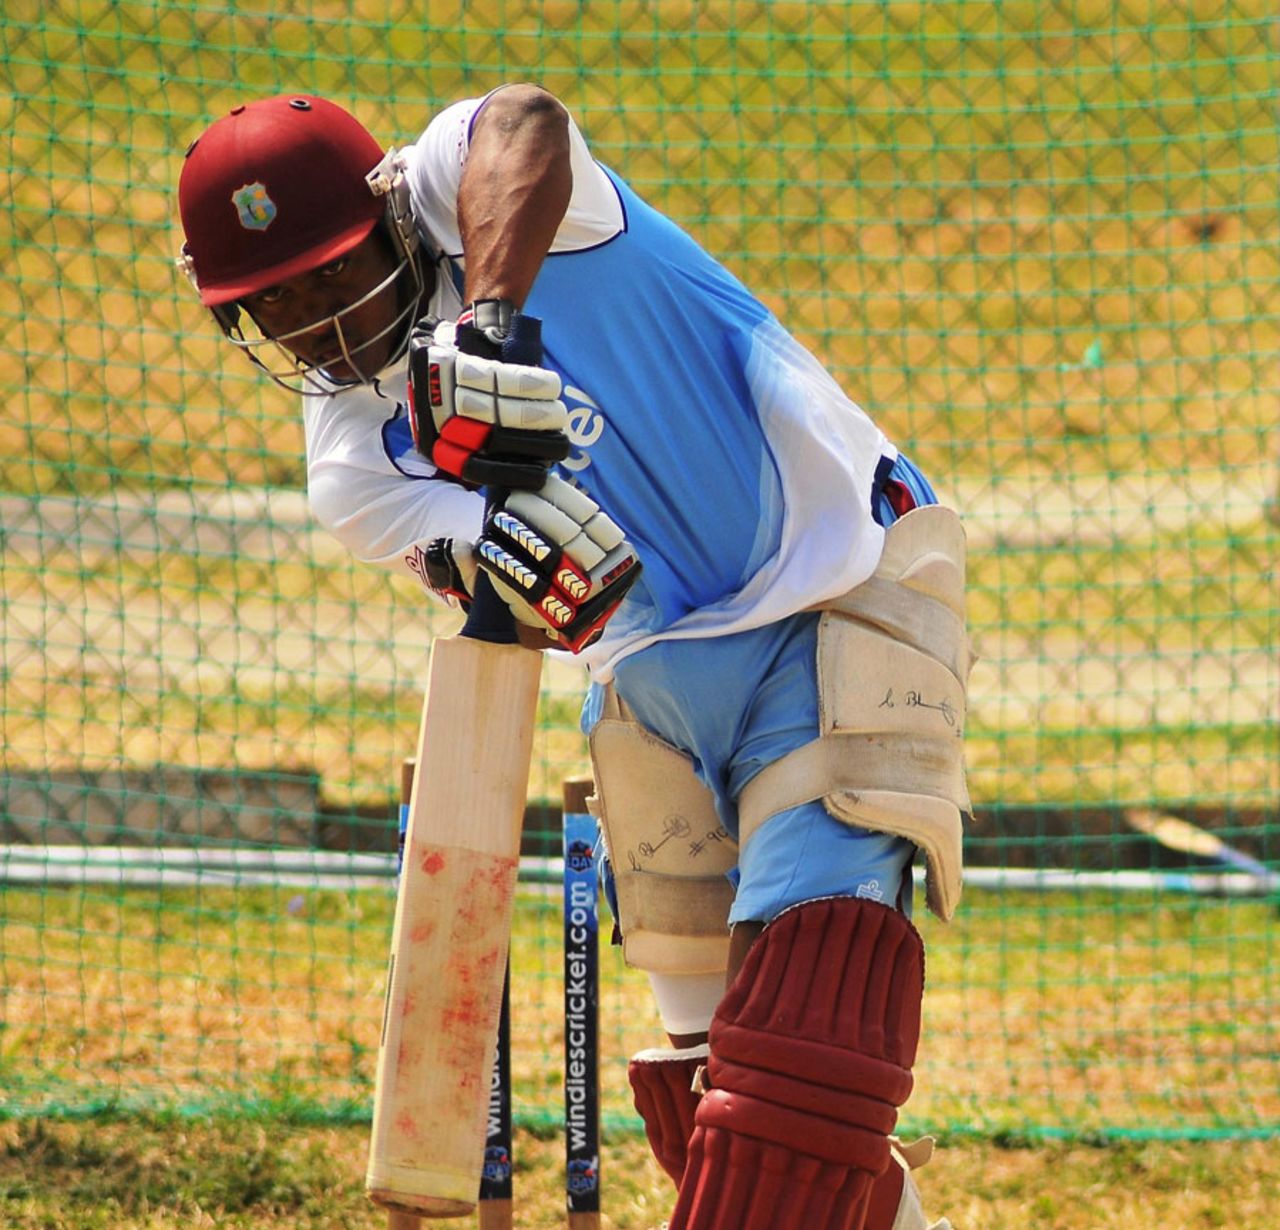 Christopher Barnwell plays a drive during a West Indies practice session, North Sound, February 28, 2013